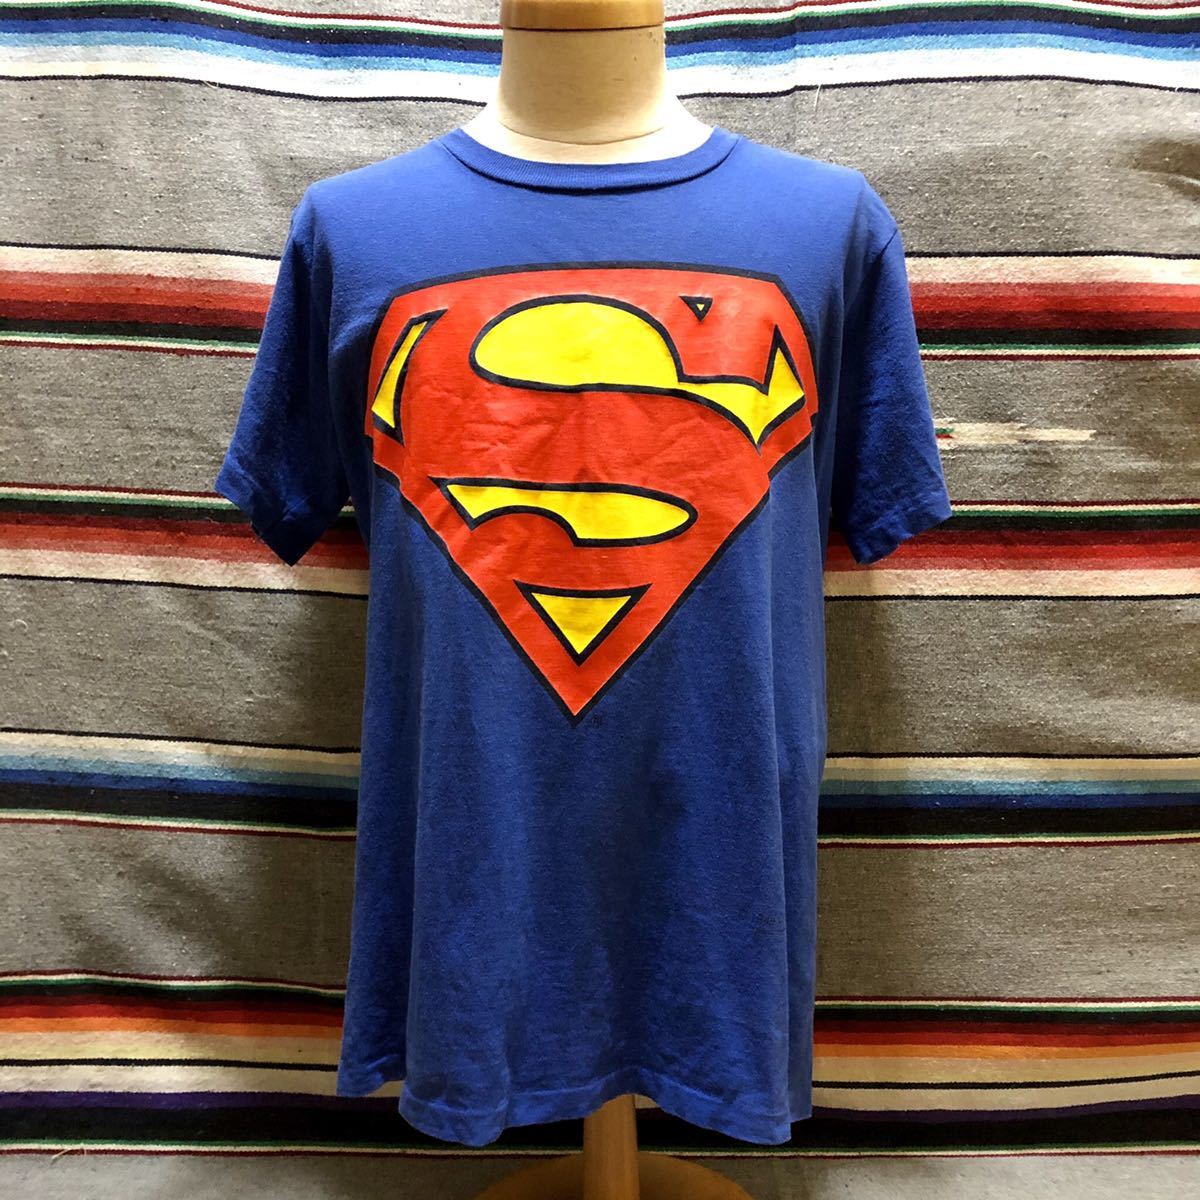 80’s Changes スーパーマン Tシャツ 検索:古着 Made in USA シングルステッチ ビンテージ アメコミ Superman_画像1